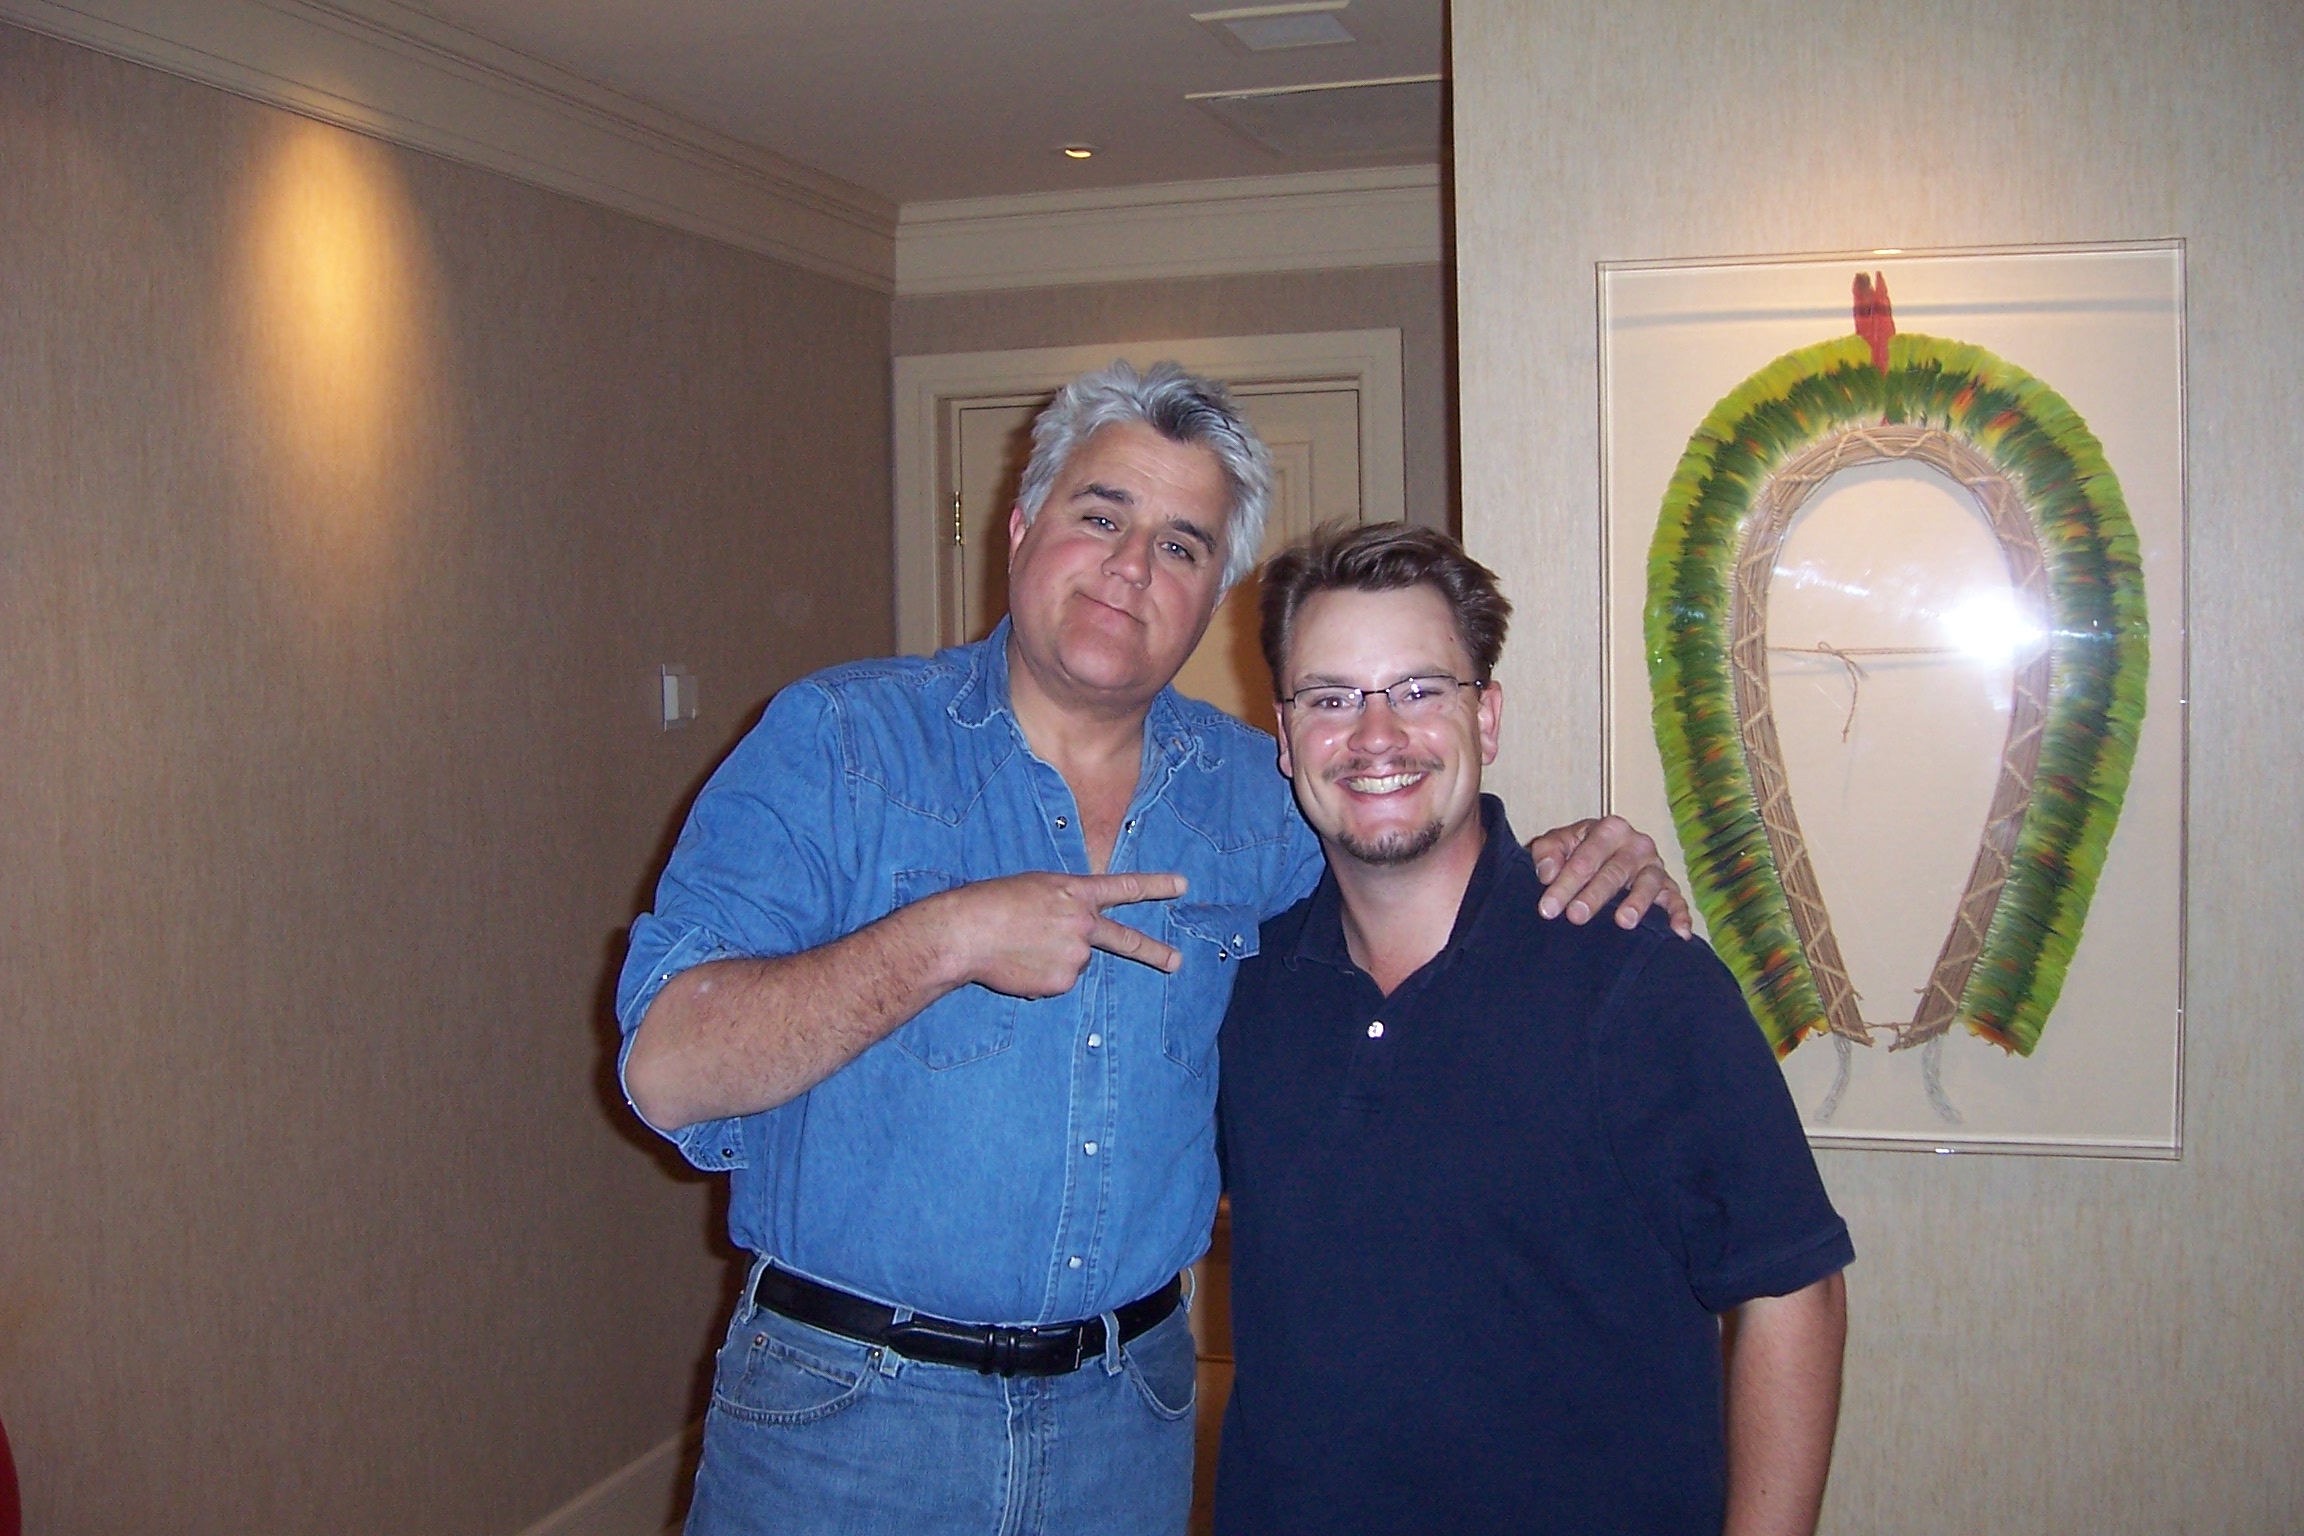 Me and Jay Leno after I shot an interview with him for a Bobby Slayton Comedy intro video